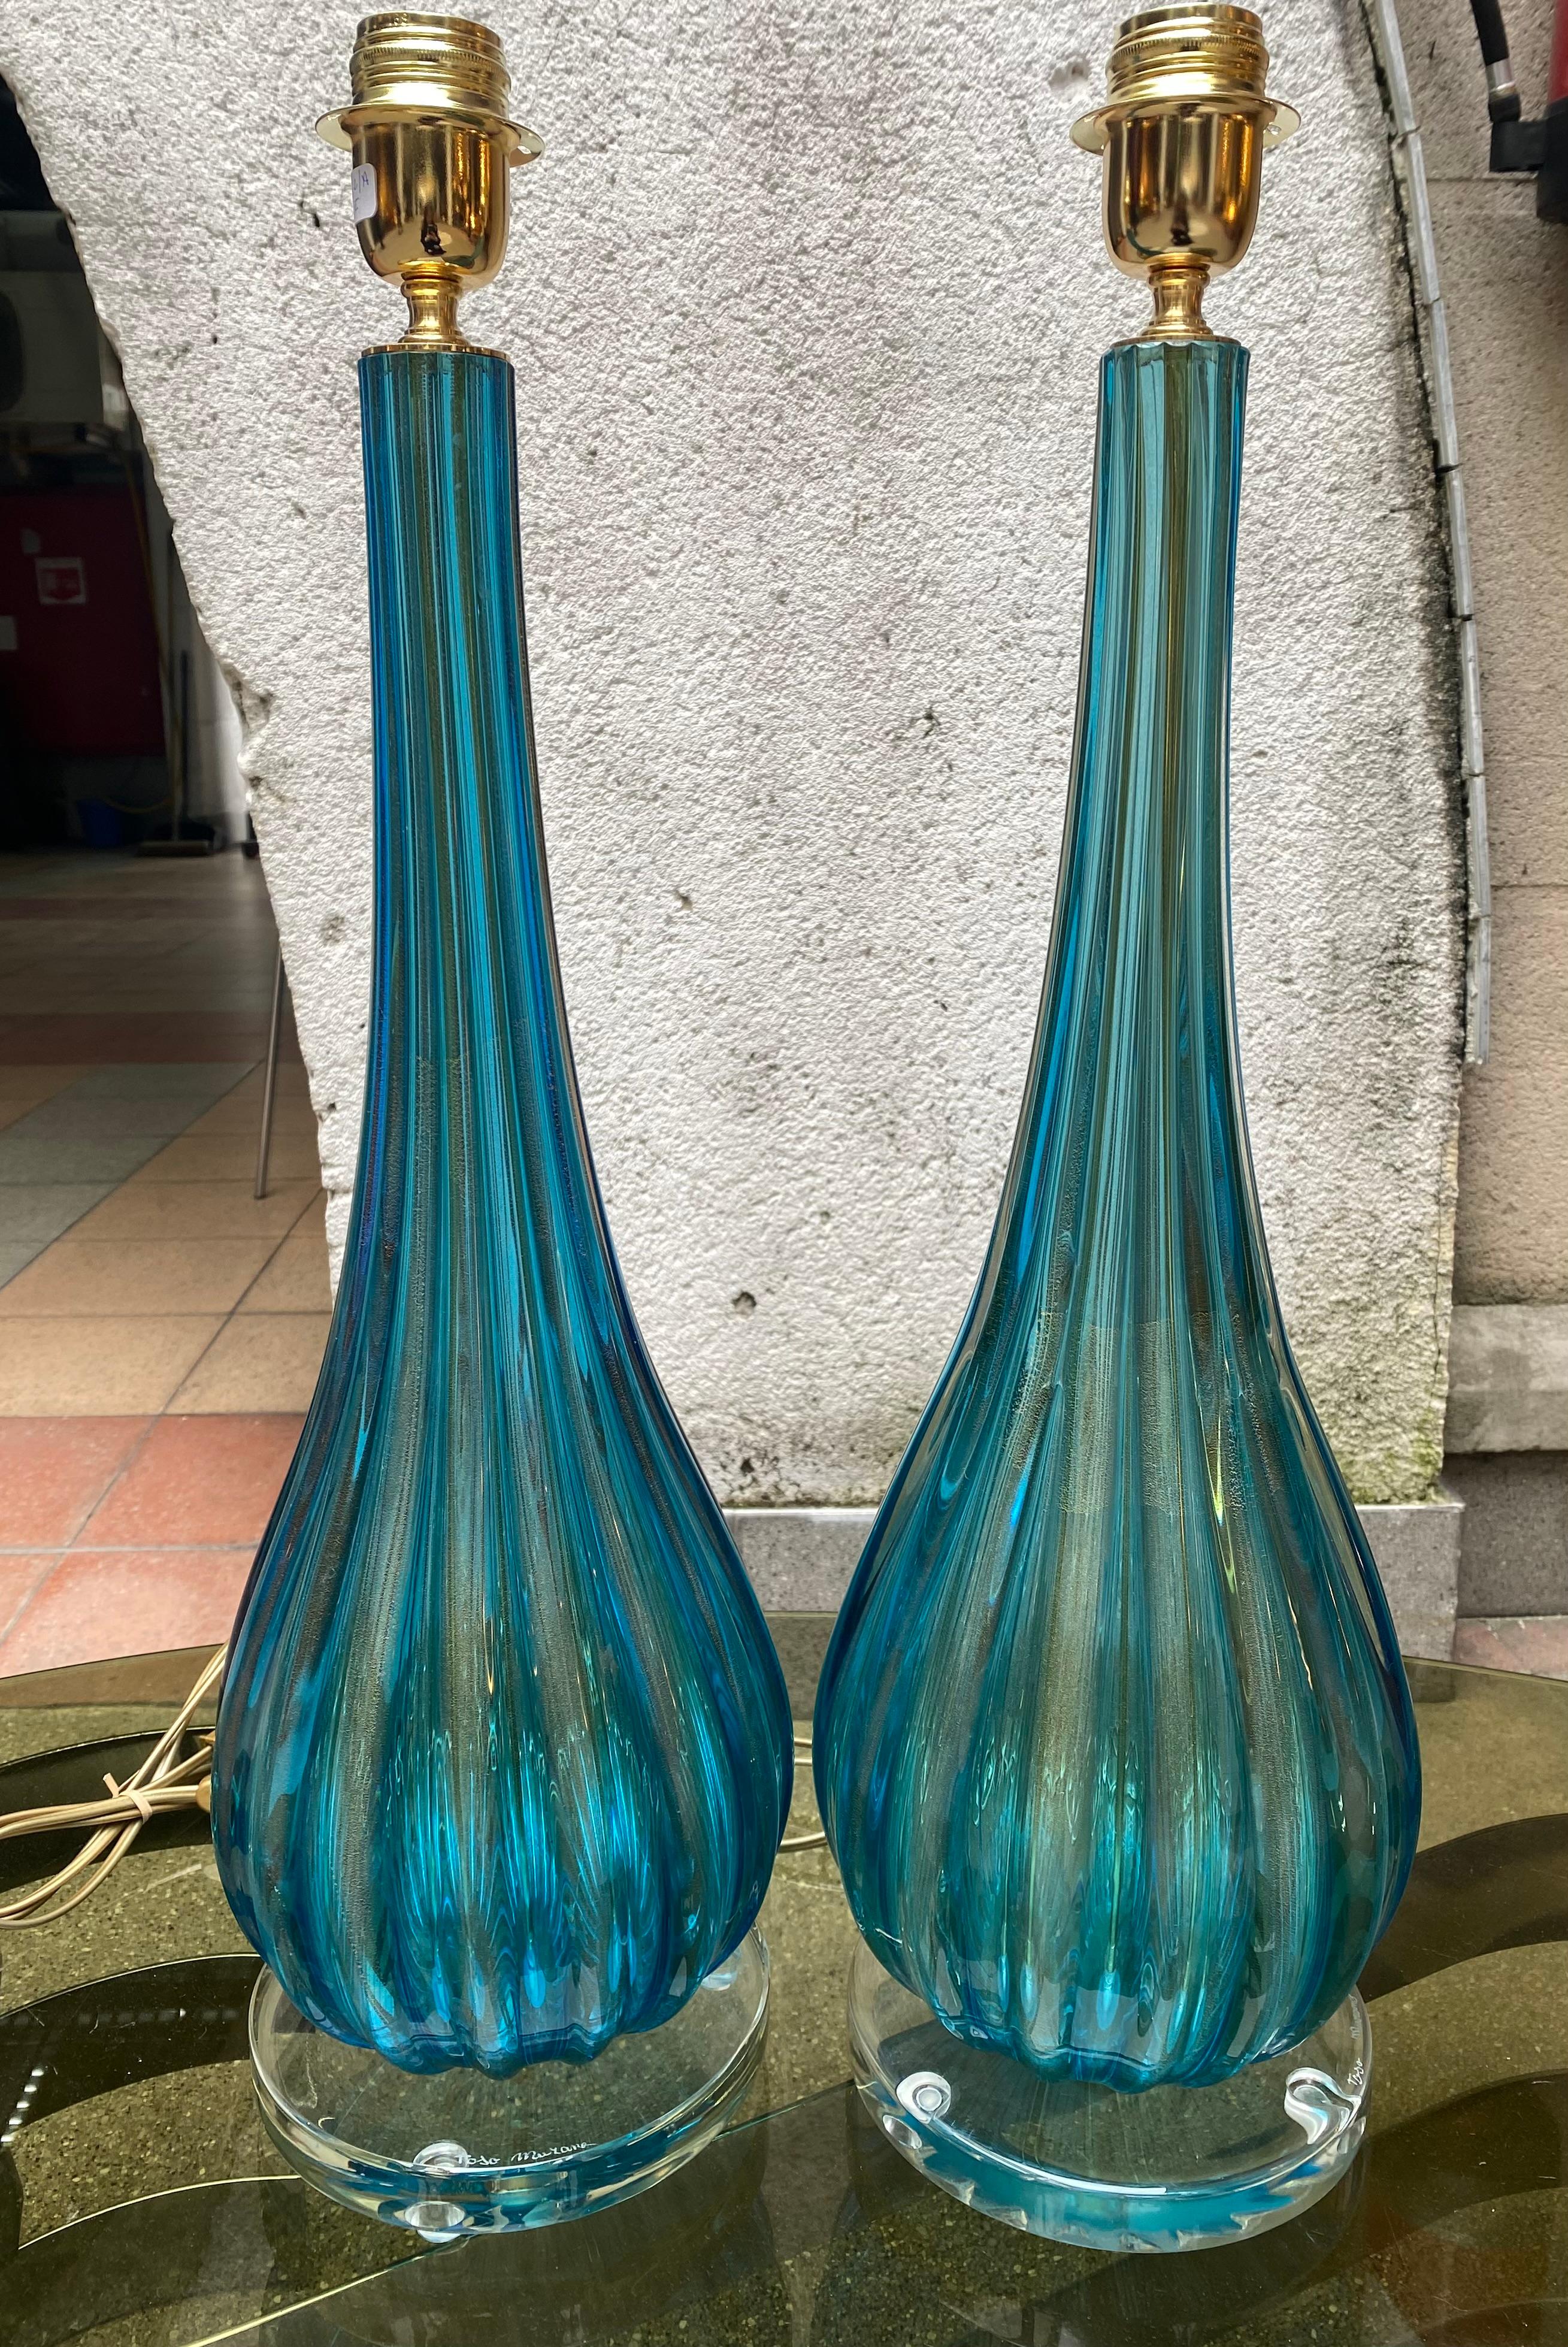 Pair of Toso Murano lamps 
Murano glass 
Blue and gold 
Dimensions : h62xl20cm
ref : c/1942/2/A
Price : 3200€ for the pair.